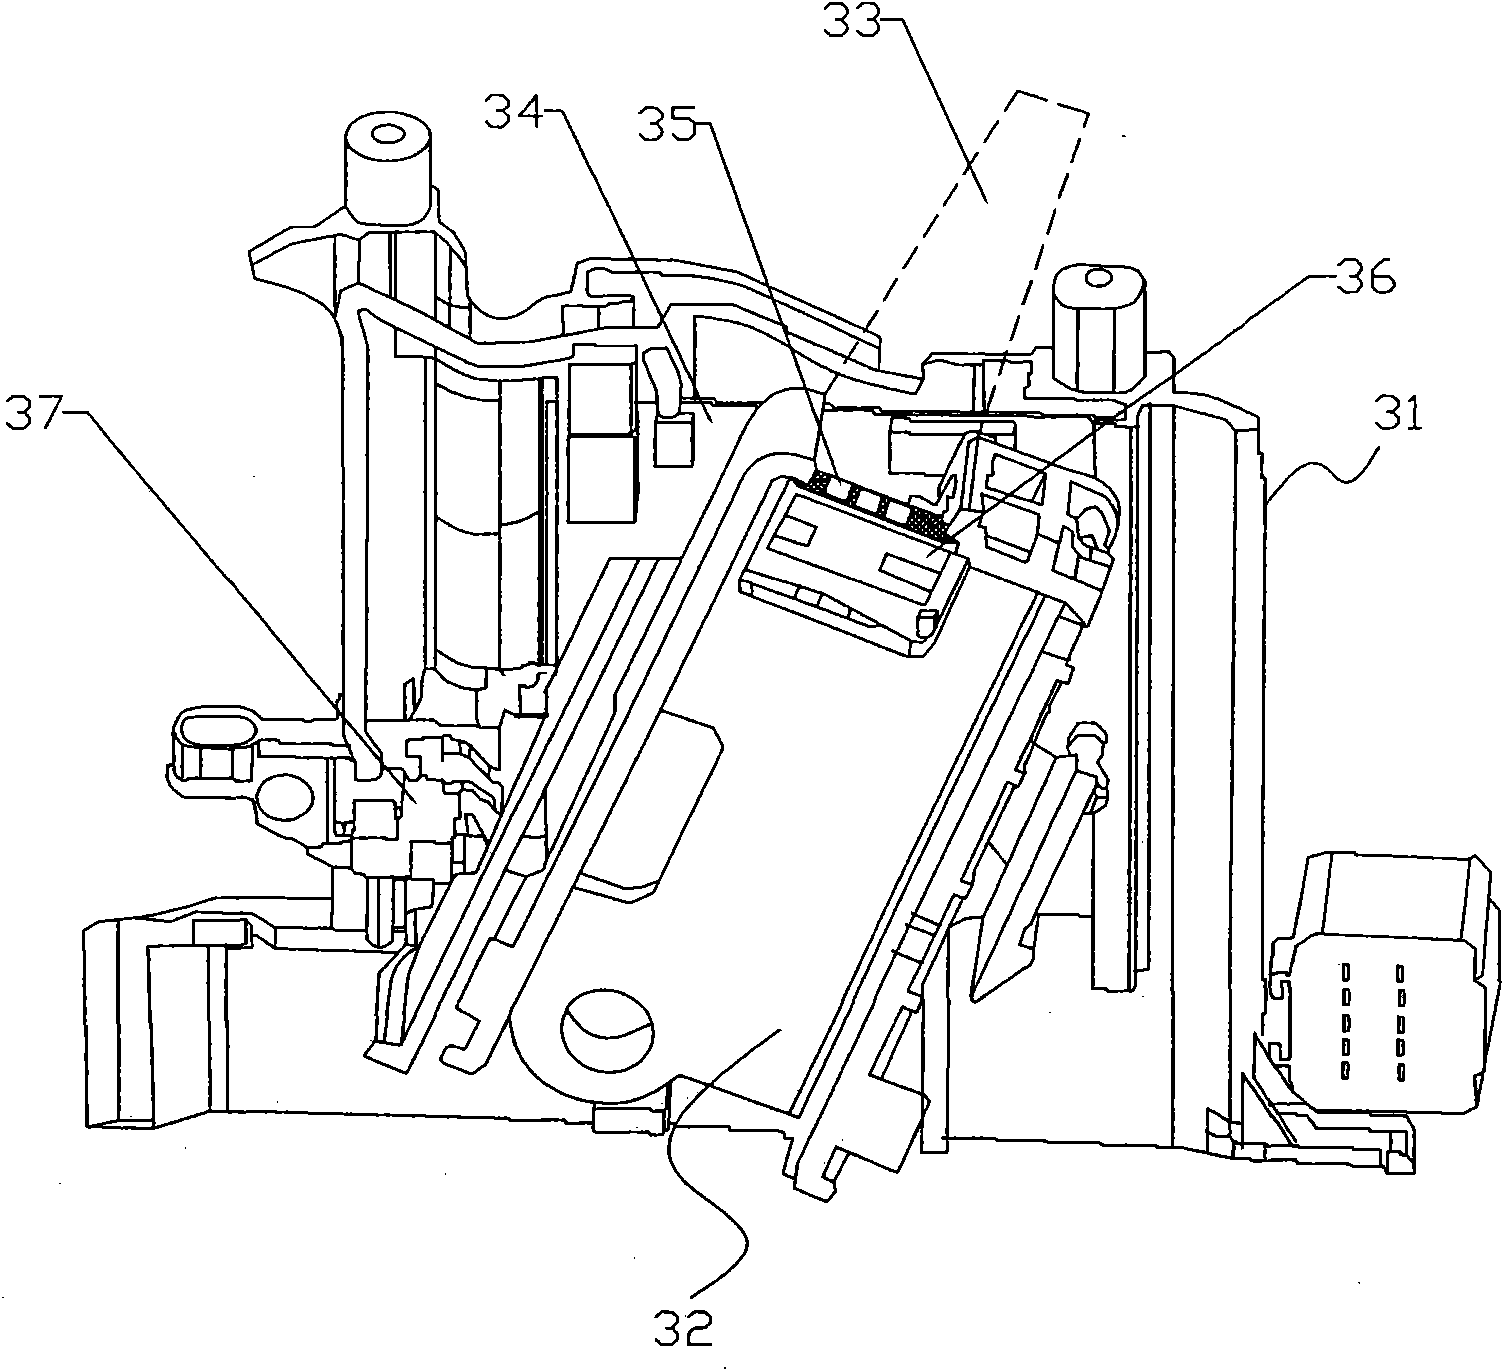 Vehicle automatic gear shifting device